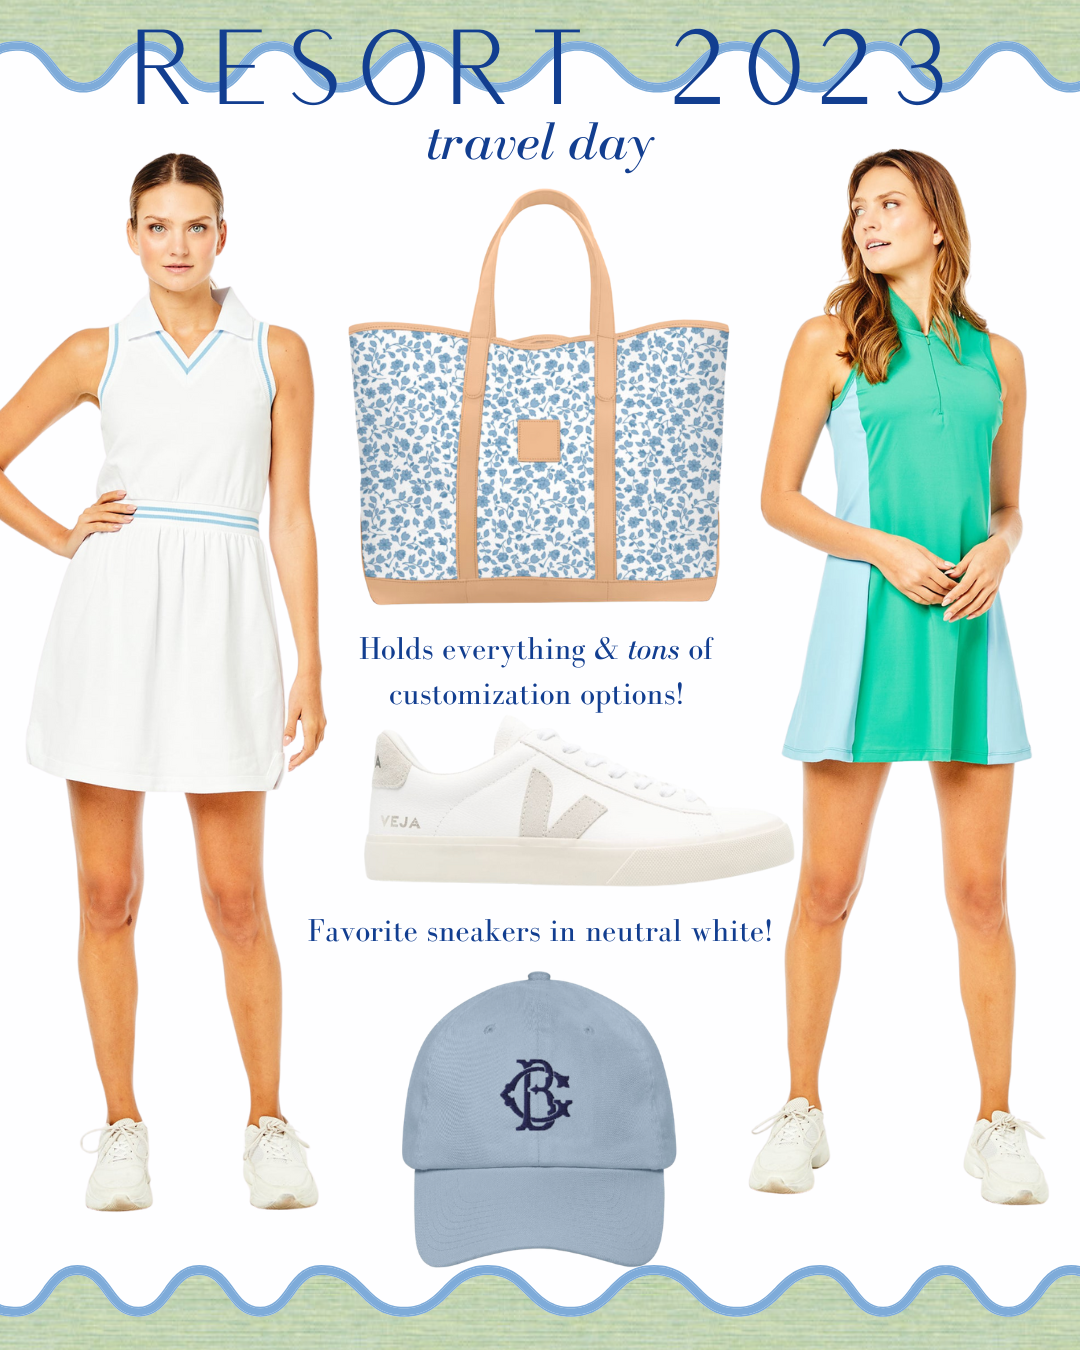 travel day outfit 2023, travel day outfit ideas, road trip outfits, cute travel outfits, cute plane outfits, resort activewear, resort activewear 2023, white polo tennis dress, monogrammed baseball cap, green activewear dress, blue floral tote bag, white veja sneakers